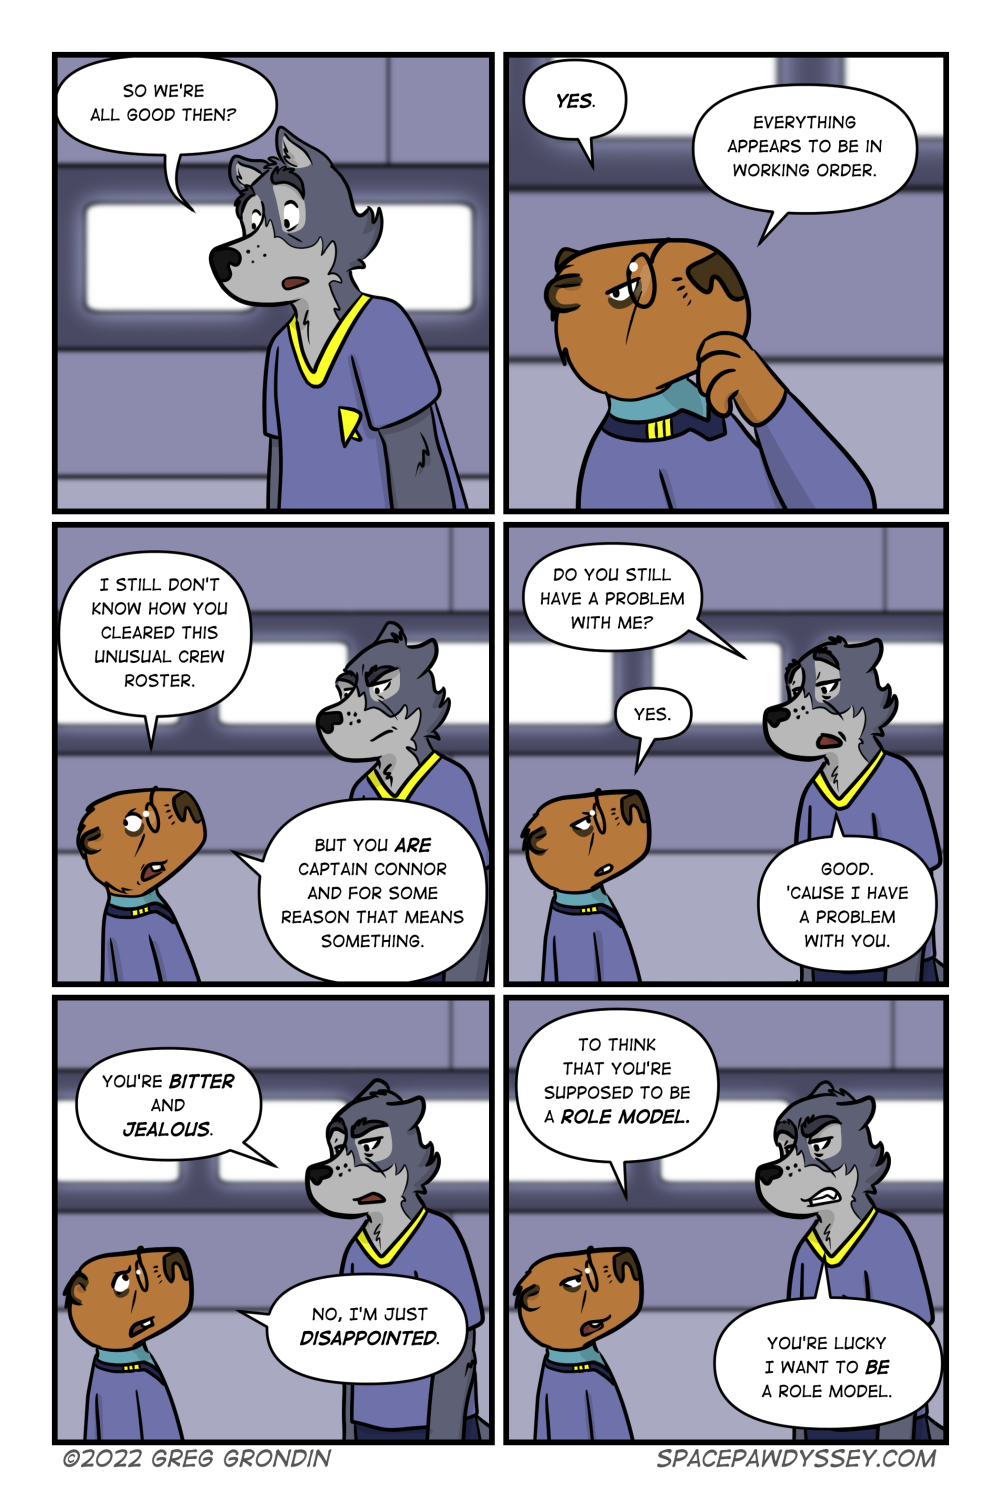 Space Pawdyssey #565